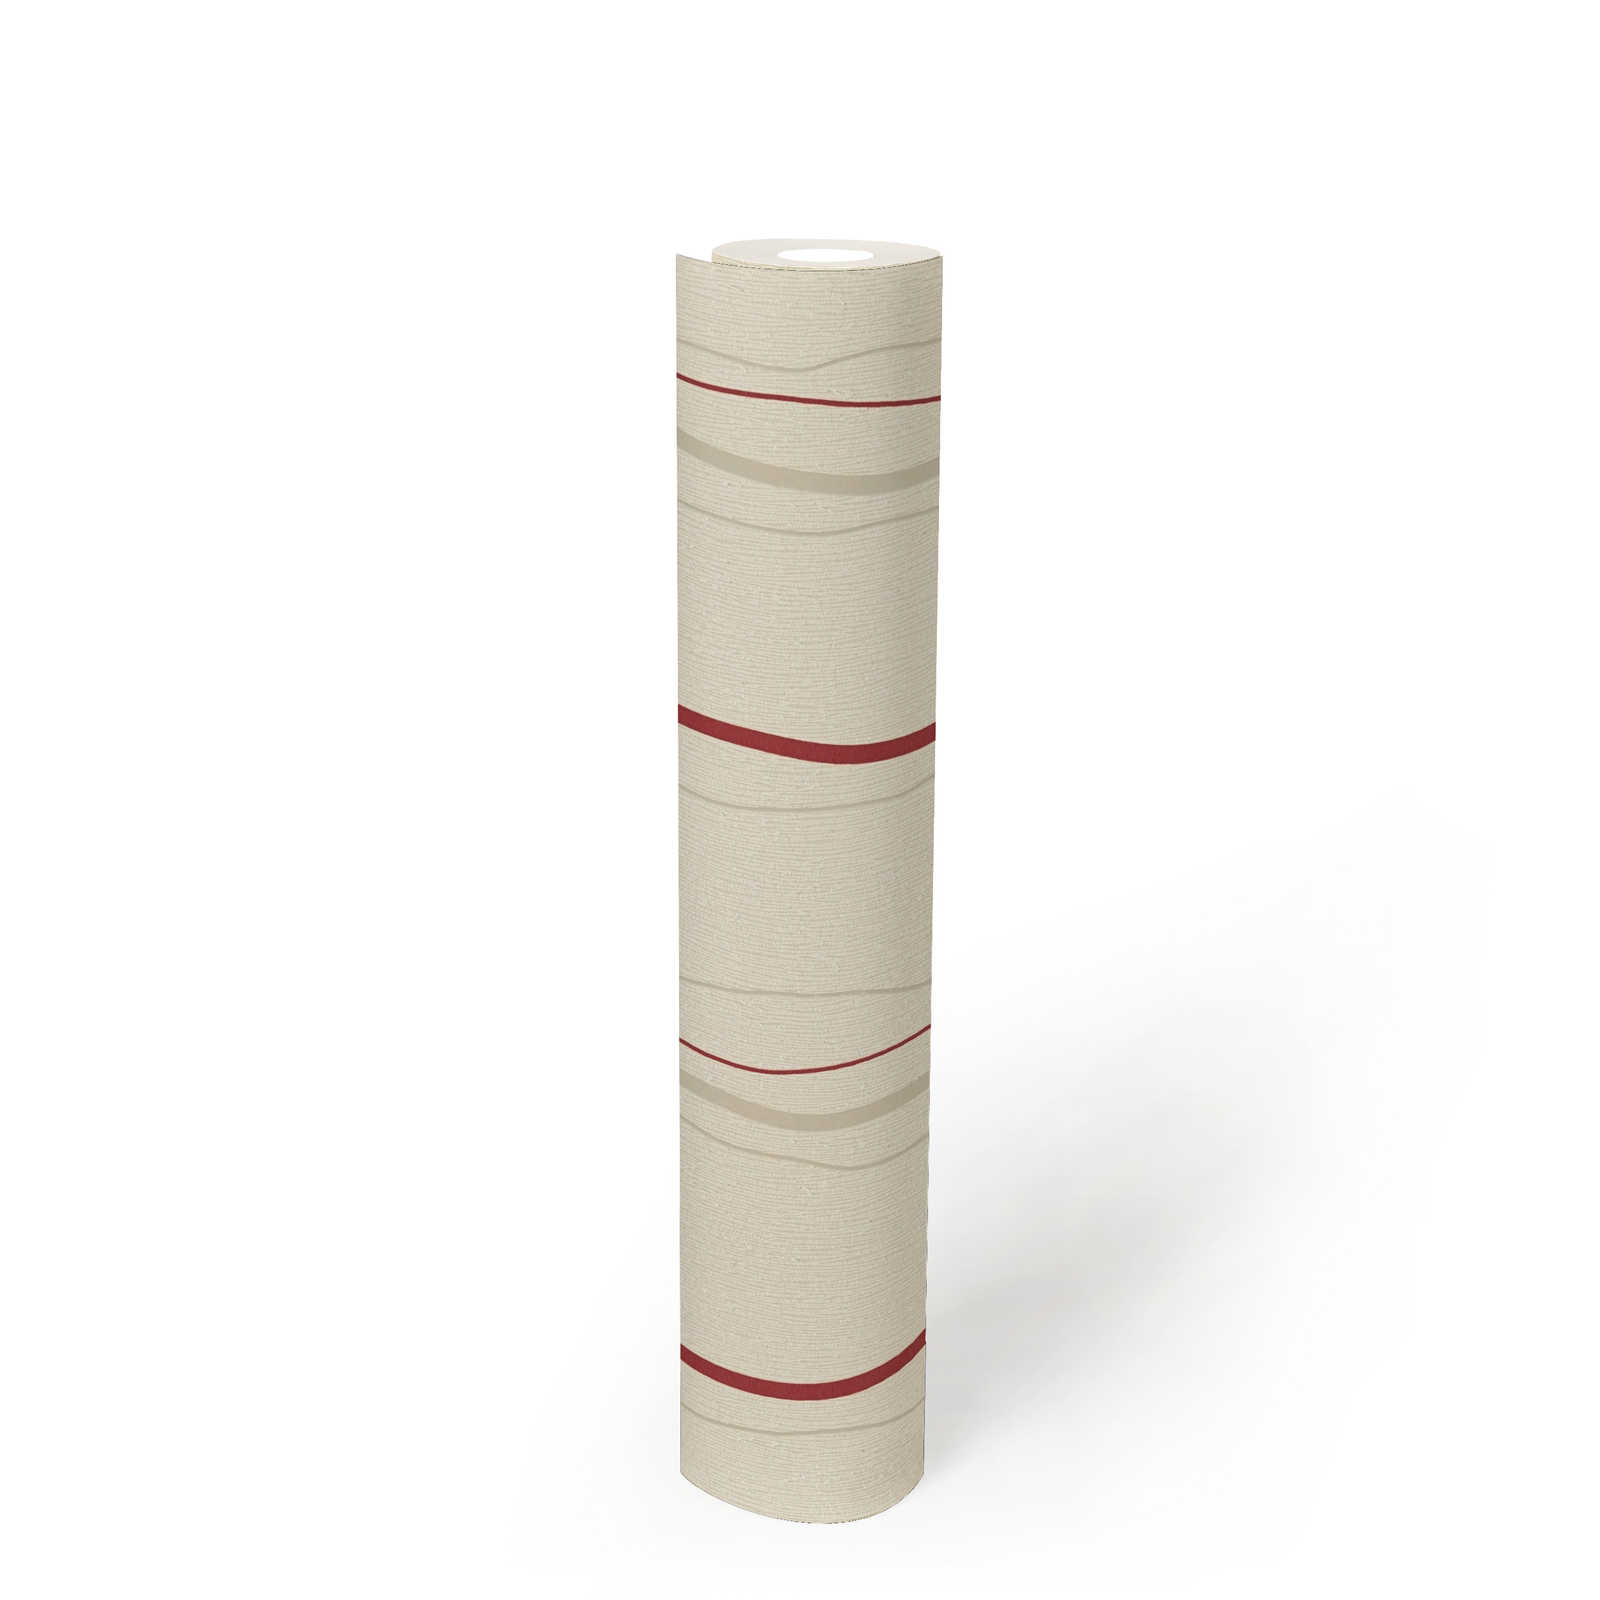             Wallpaper with line pattern vertical stripes - cream, red, beige
        